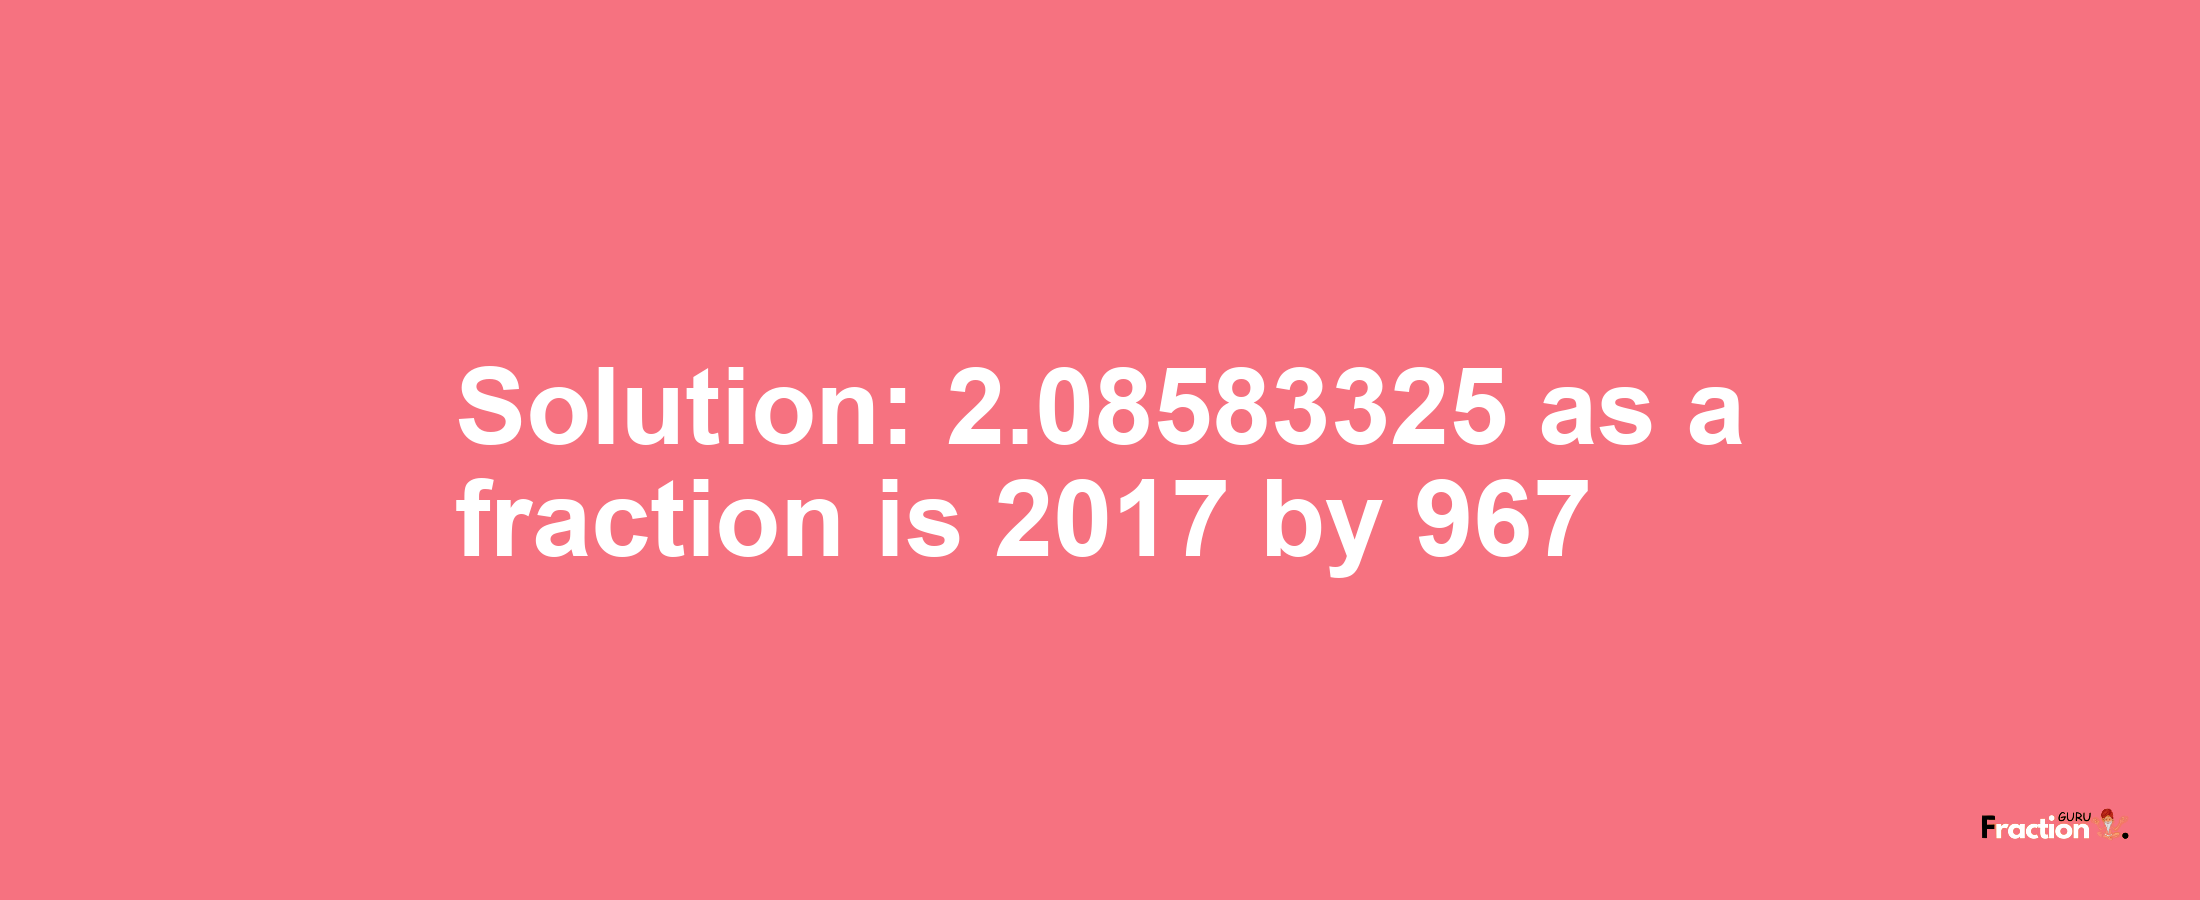 Solution:2.08583325 as a fraction is 2017/967